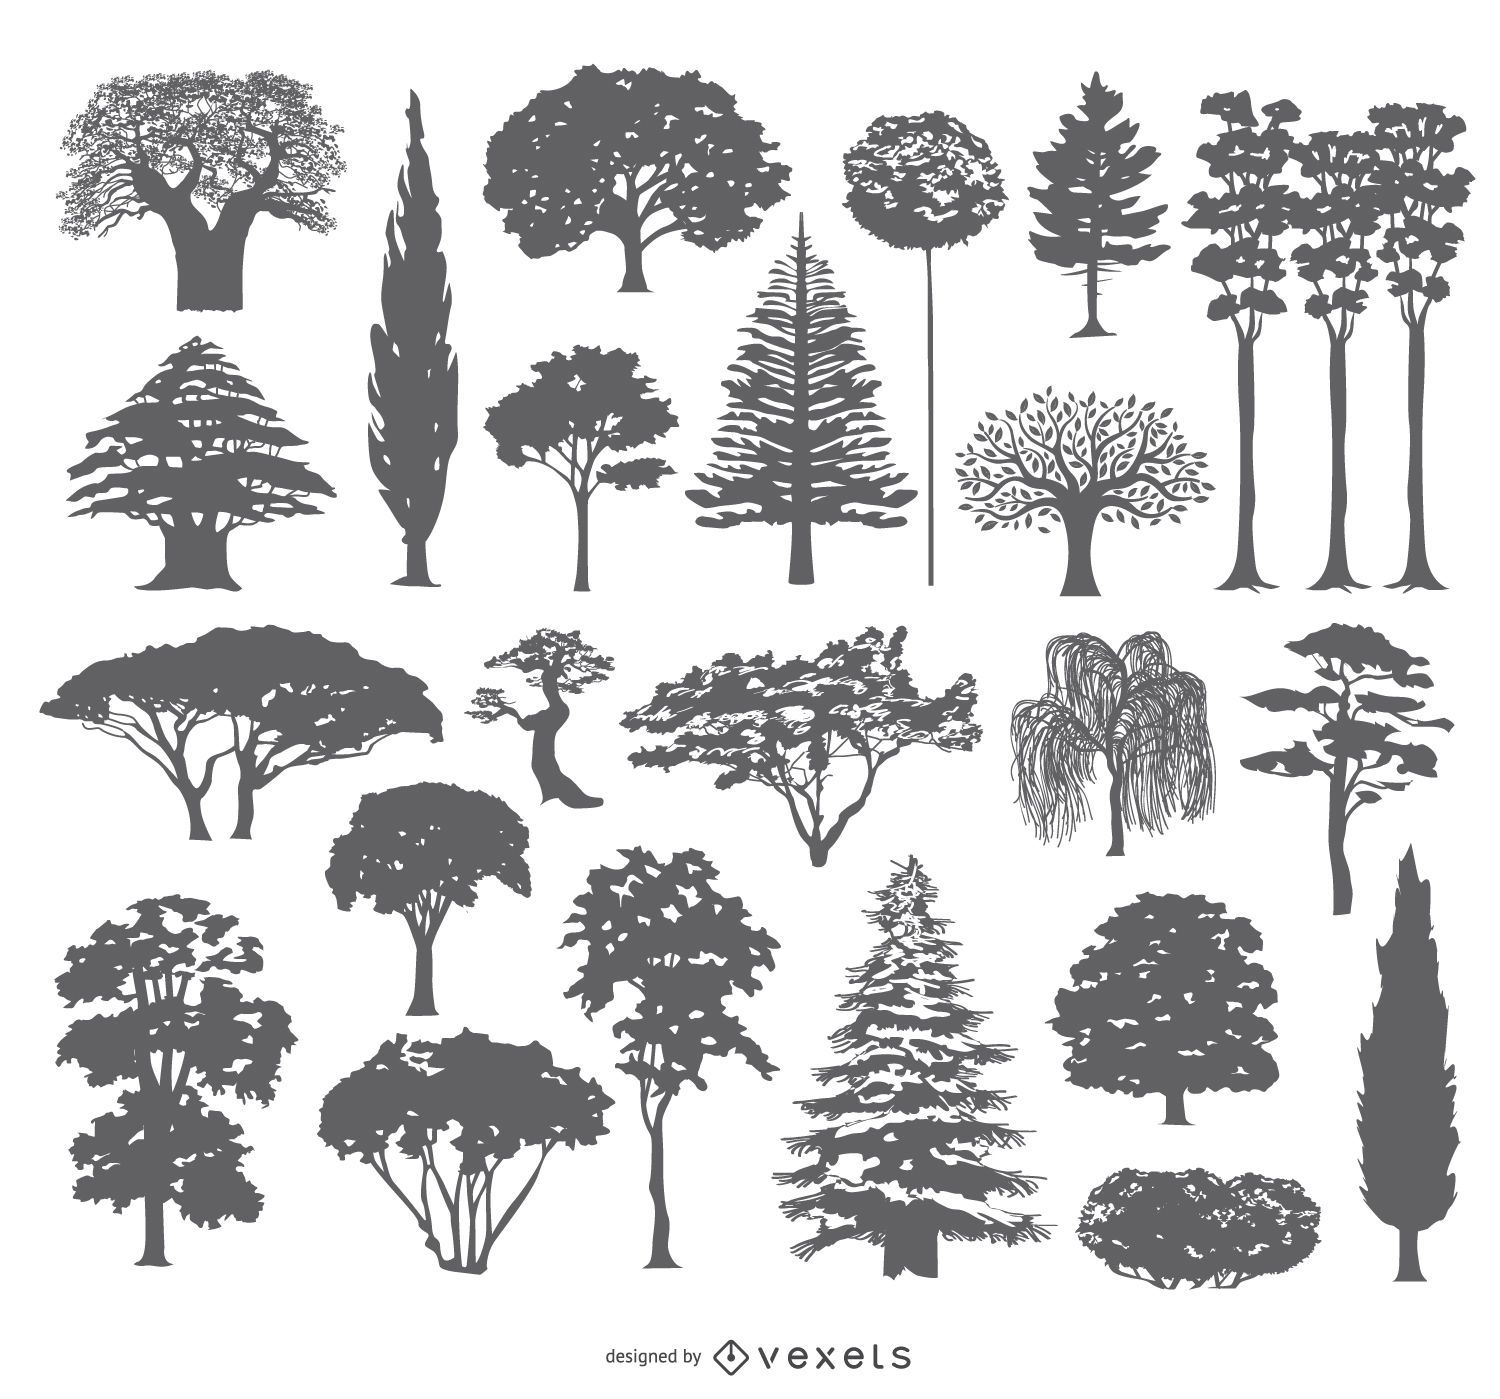 Tree silhouettes collection design